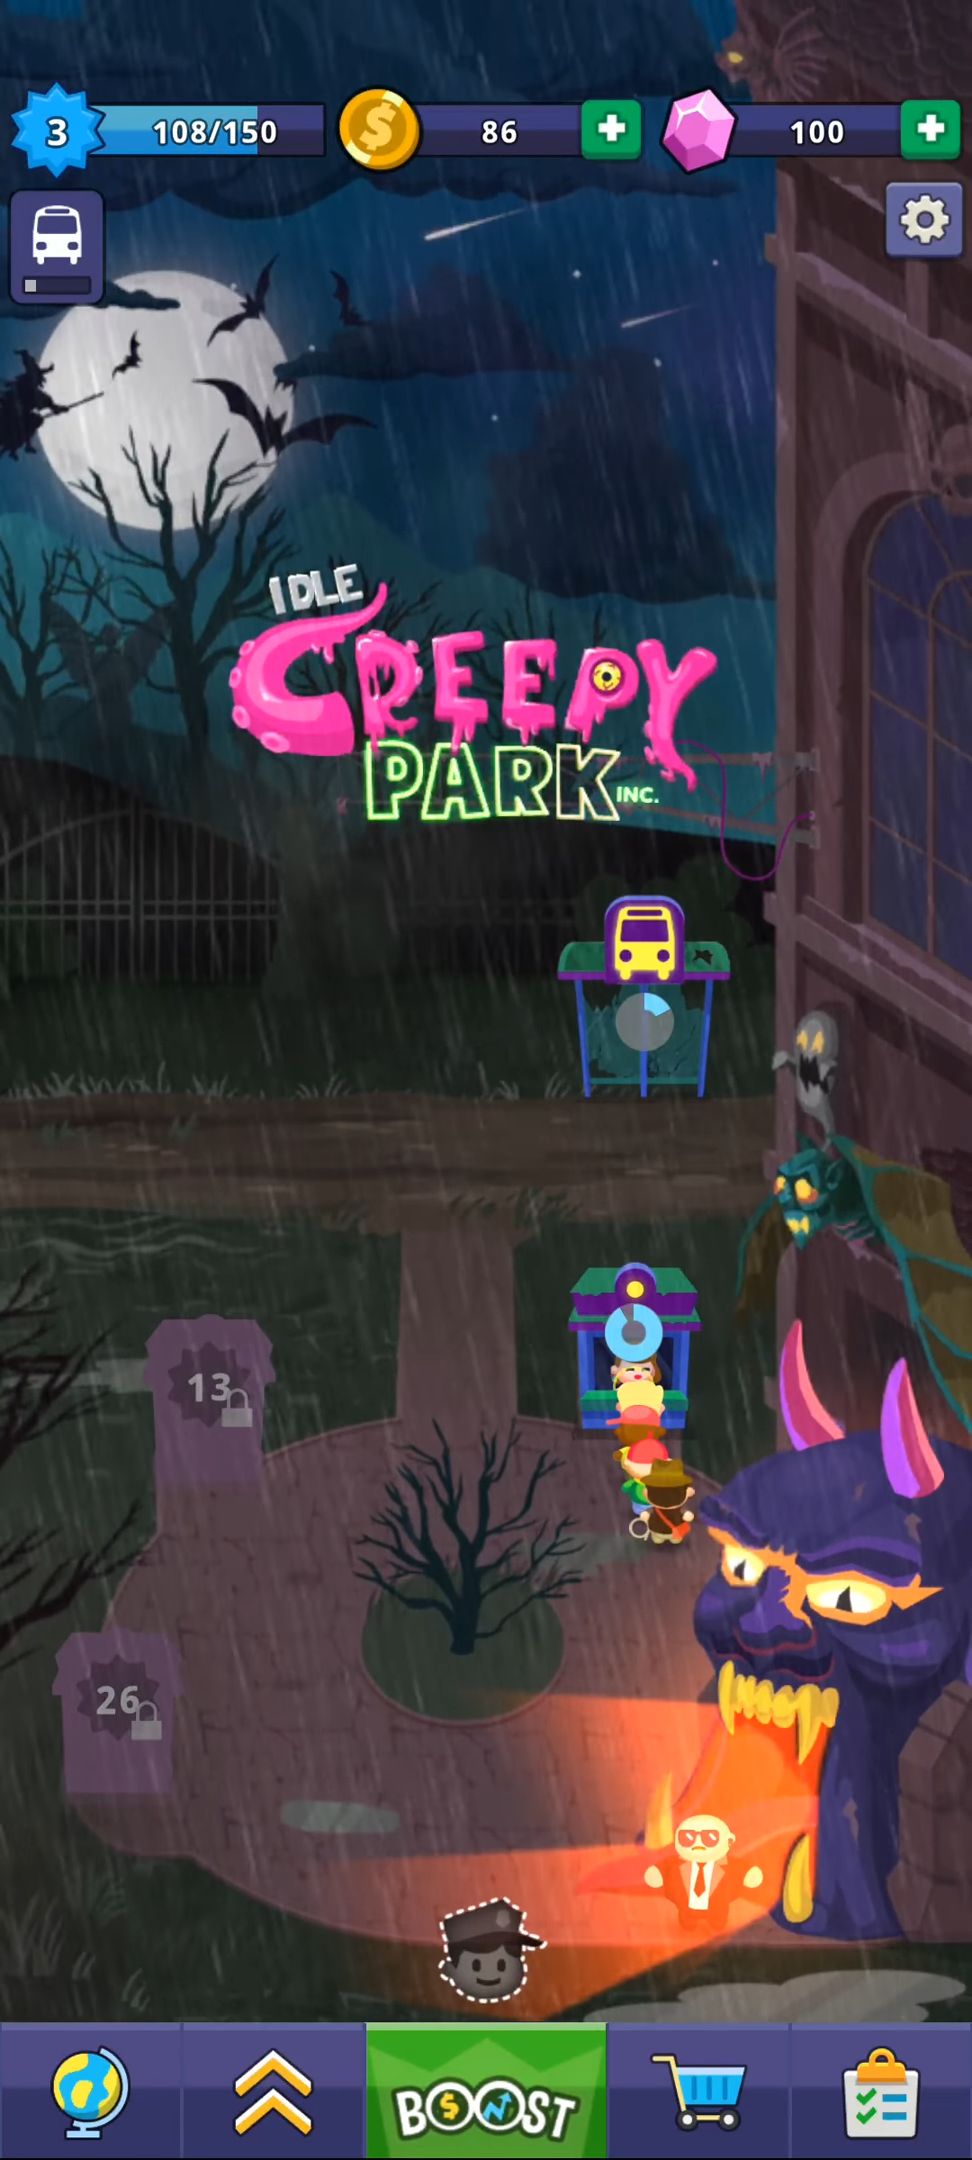 Idle Creepy Park Inc. for Android